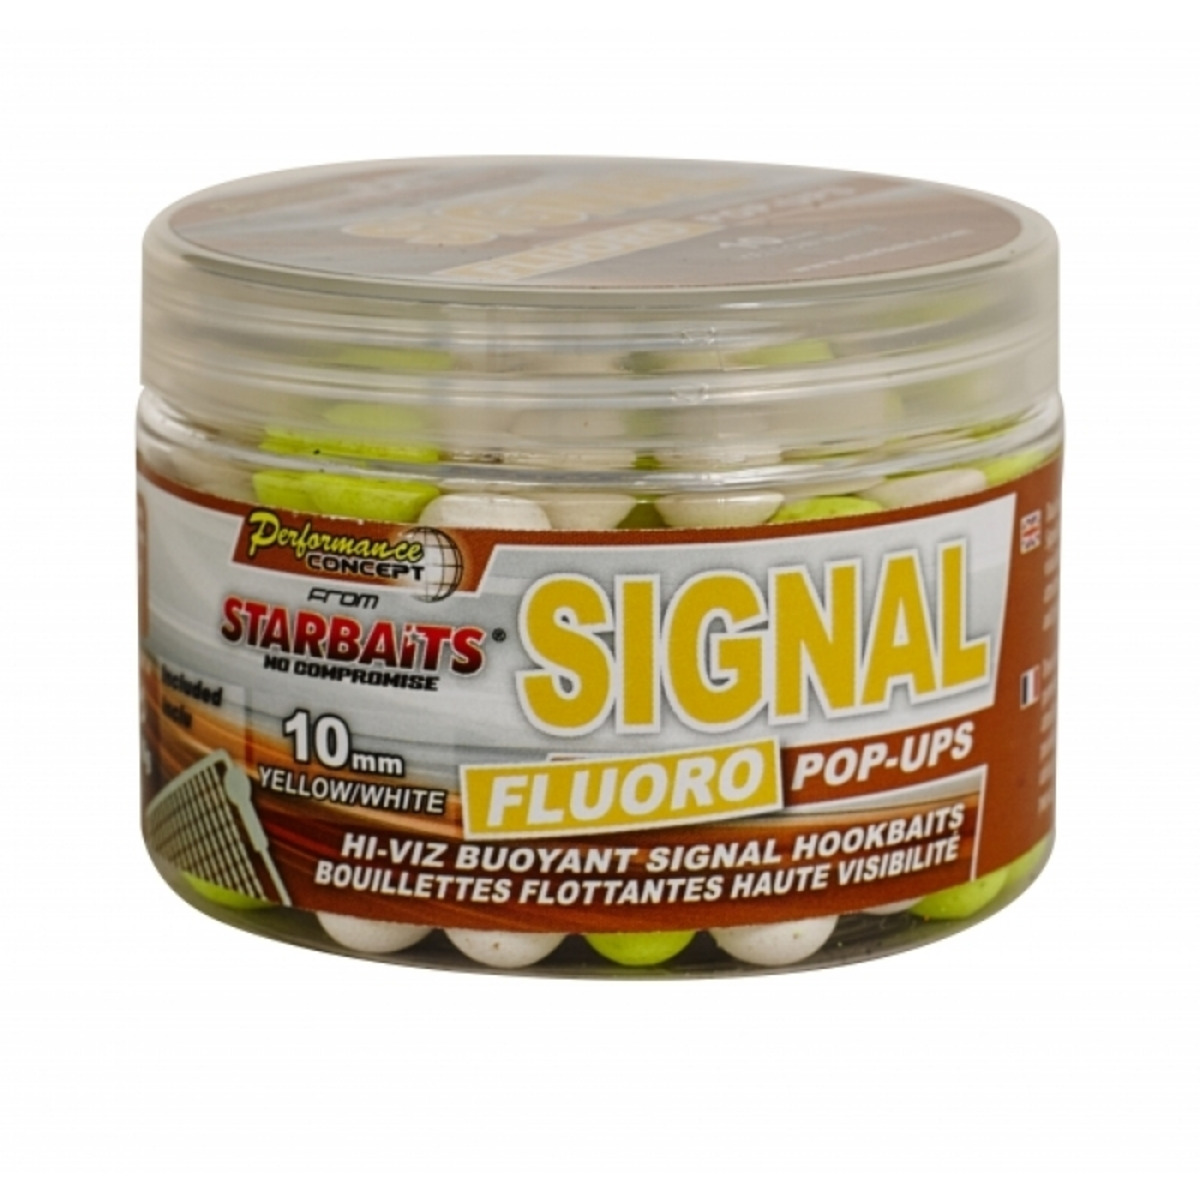 Starbaits Concept Fluo Pop Ups Signal - 10 mm  - 60 g